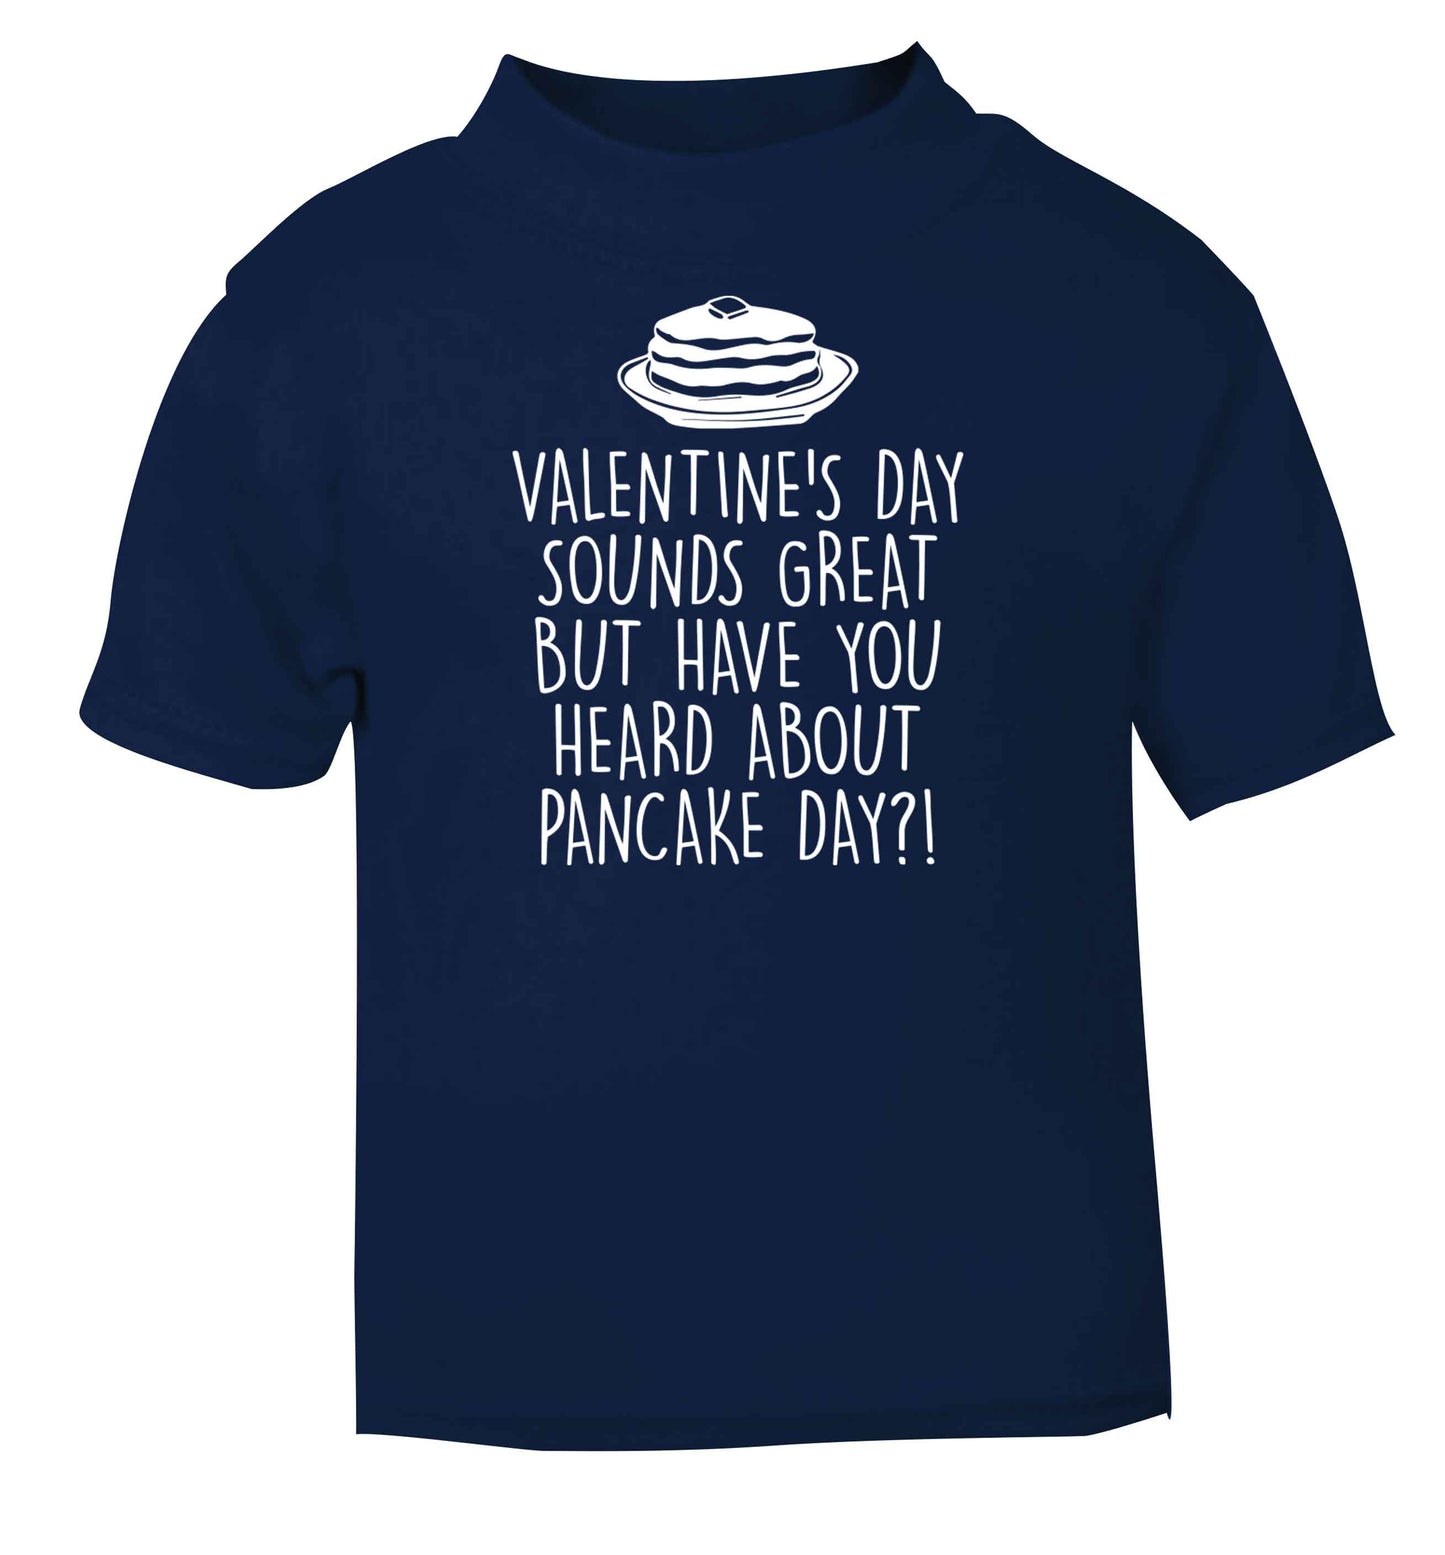 Valentine's day sounds great but have you heard about pancake day?! navy baby toddler Tshirt 2 Years